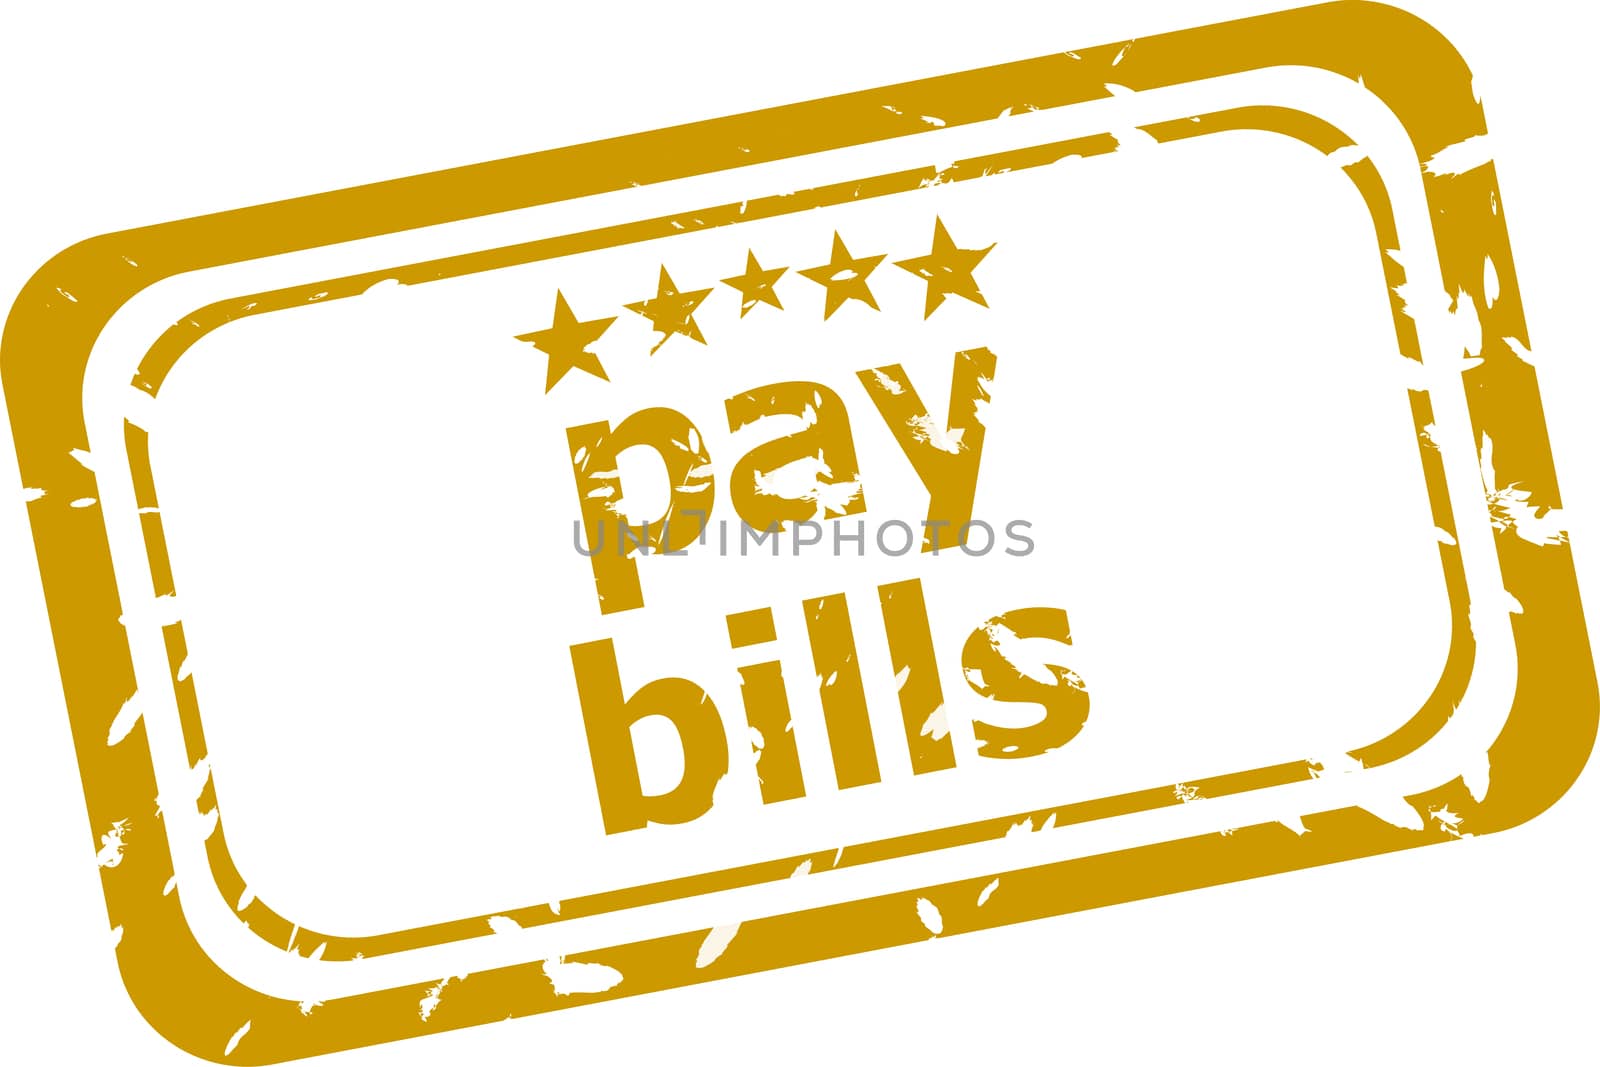 pay bills stamp isolated on white background